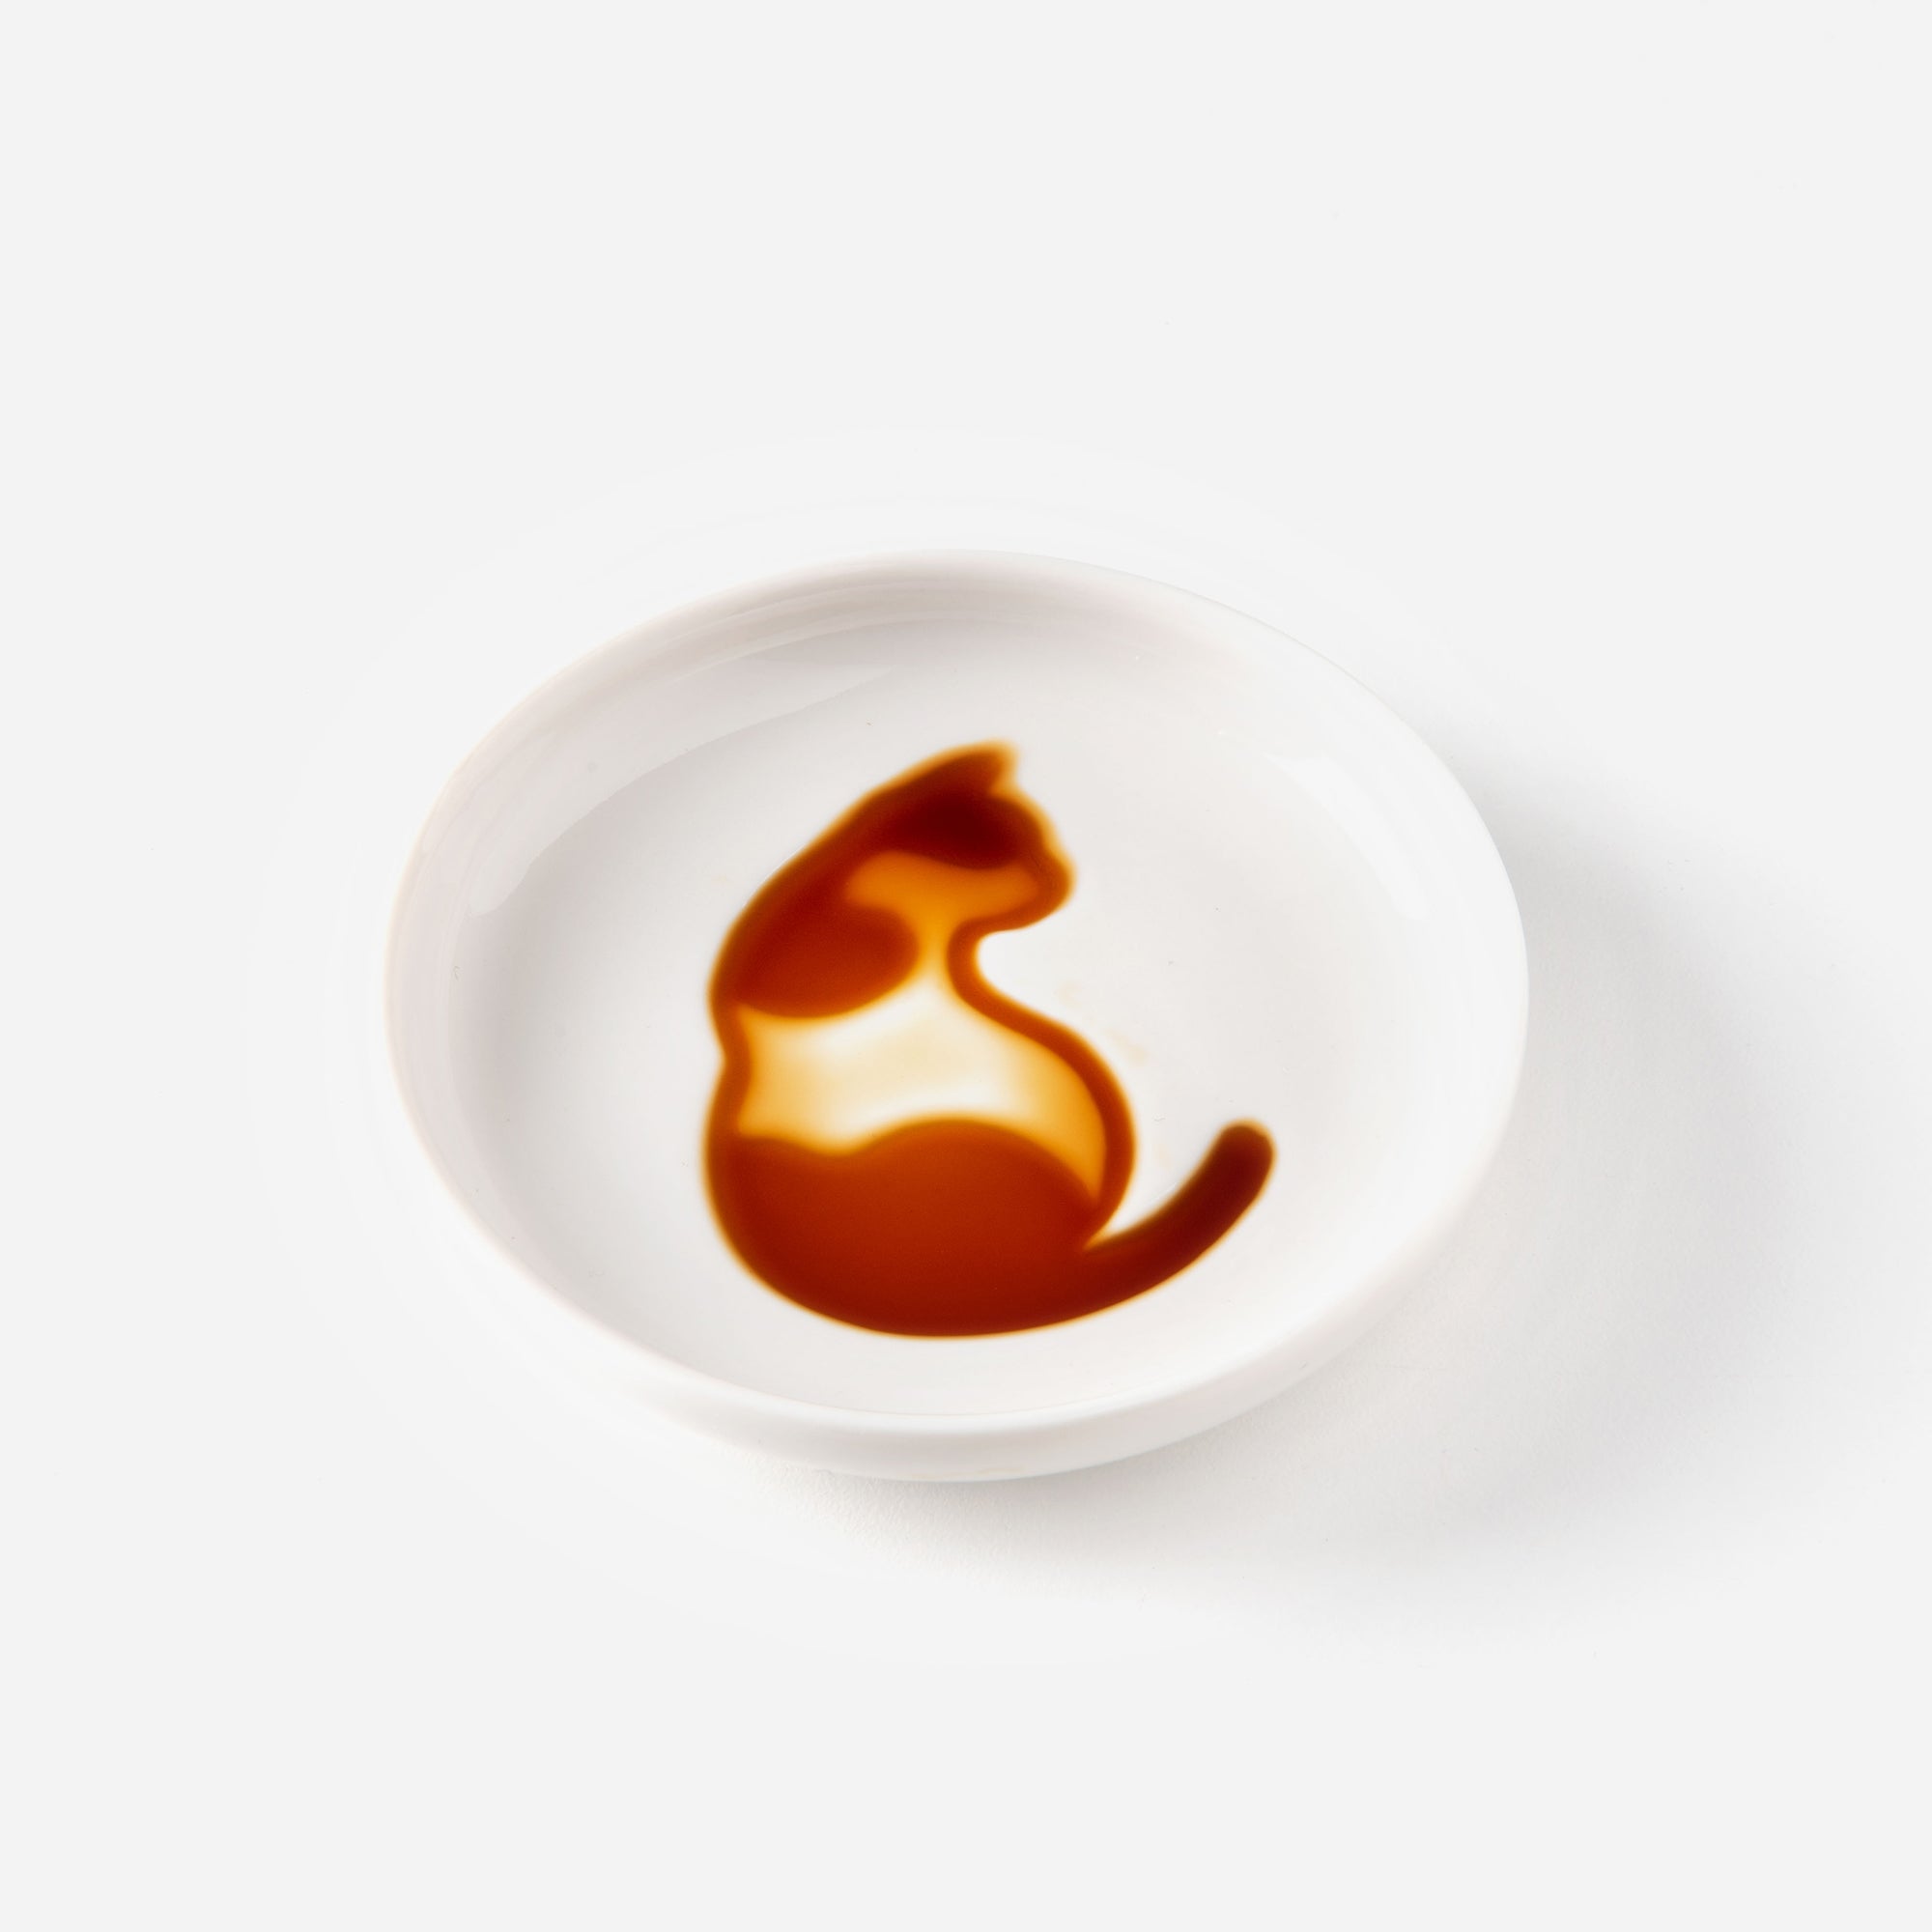 Cat Soy Sauce Dishes